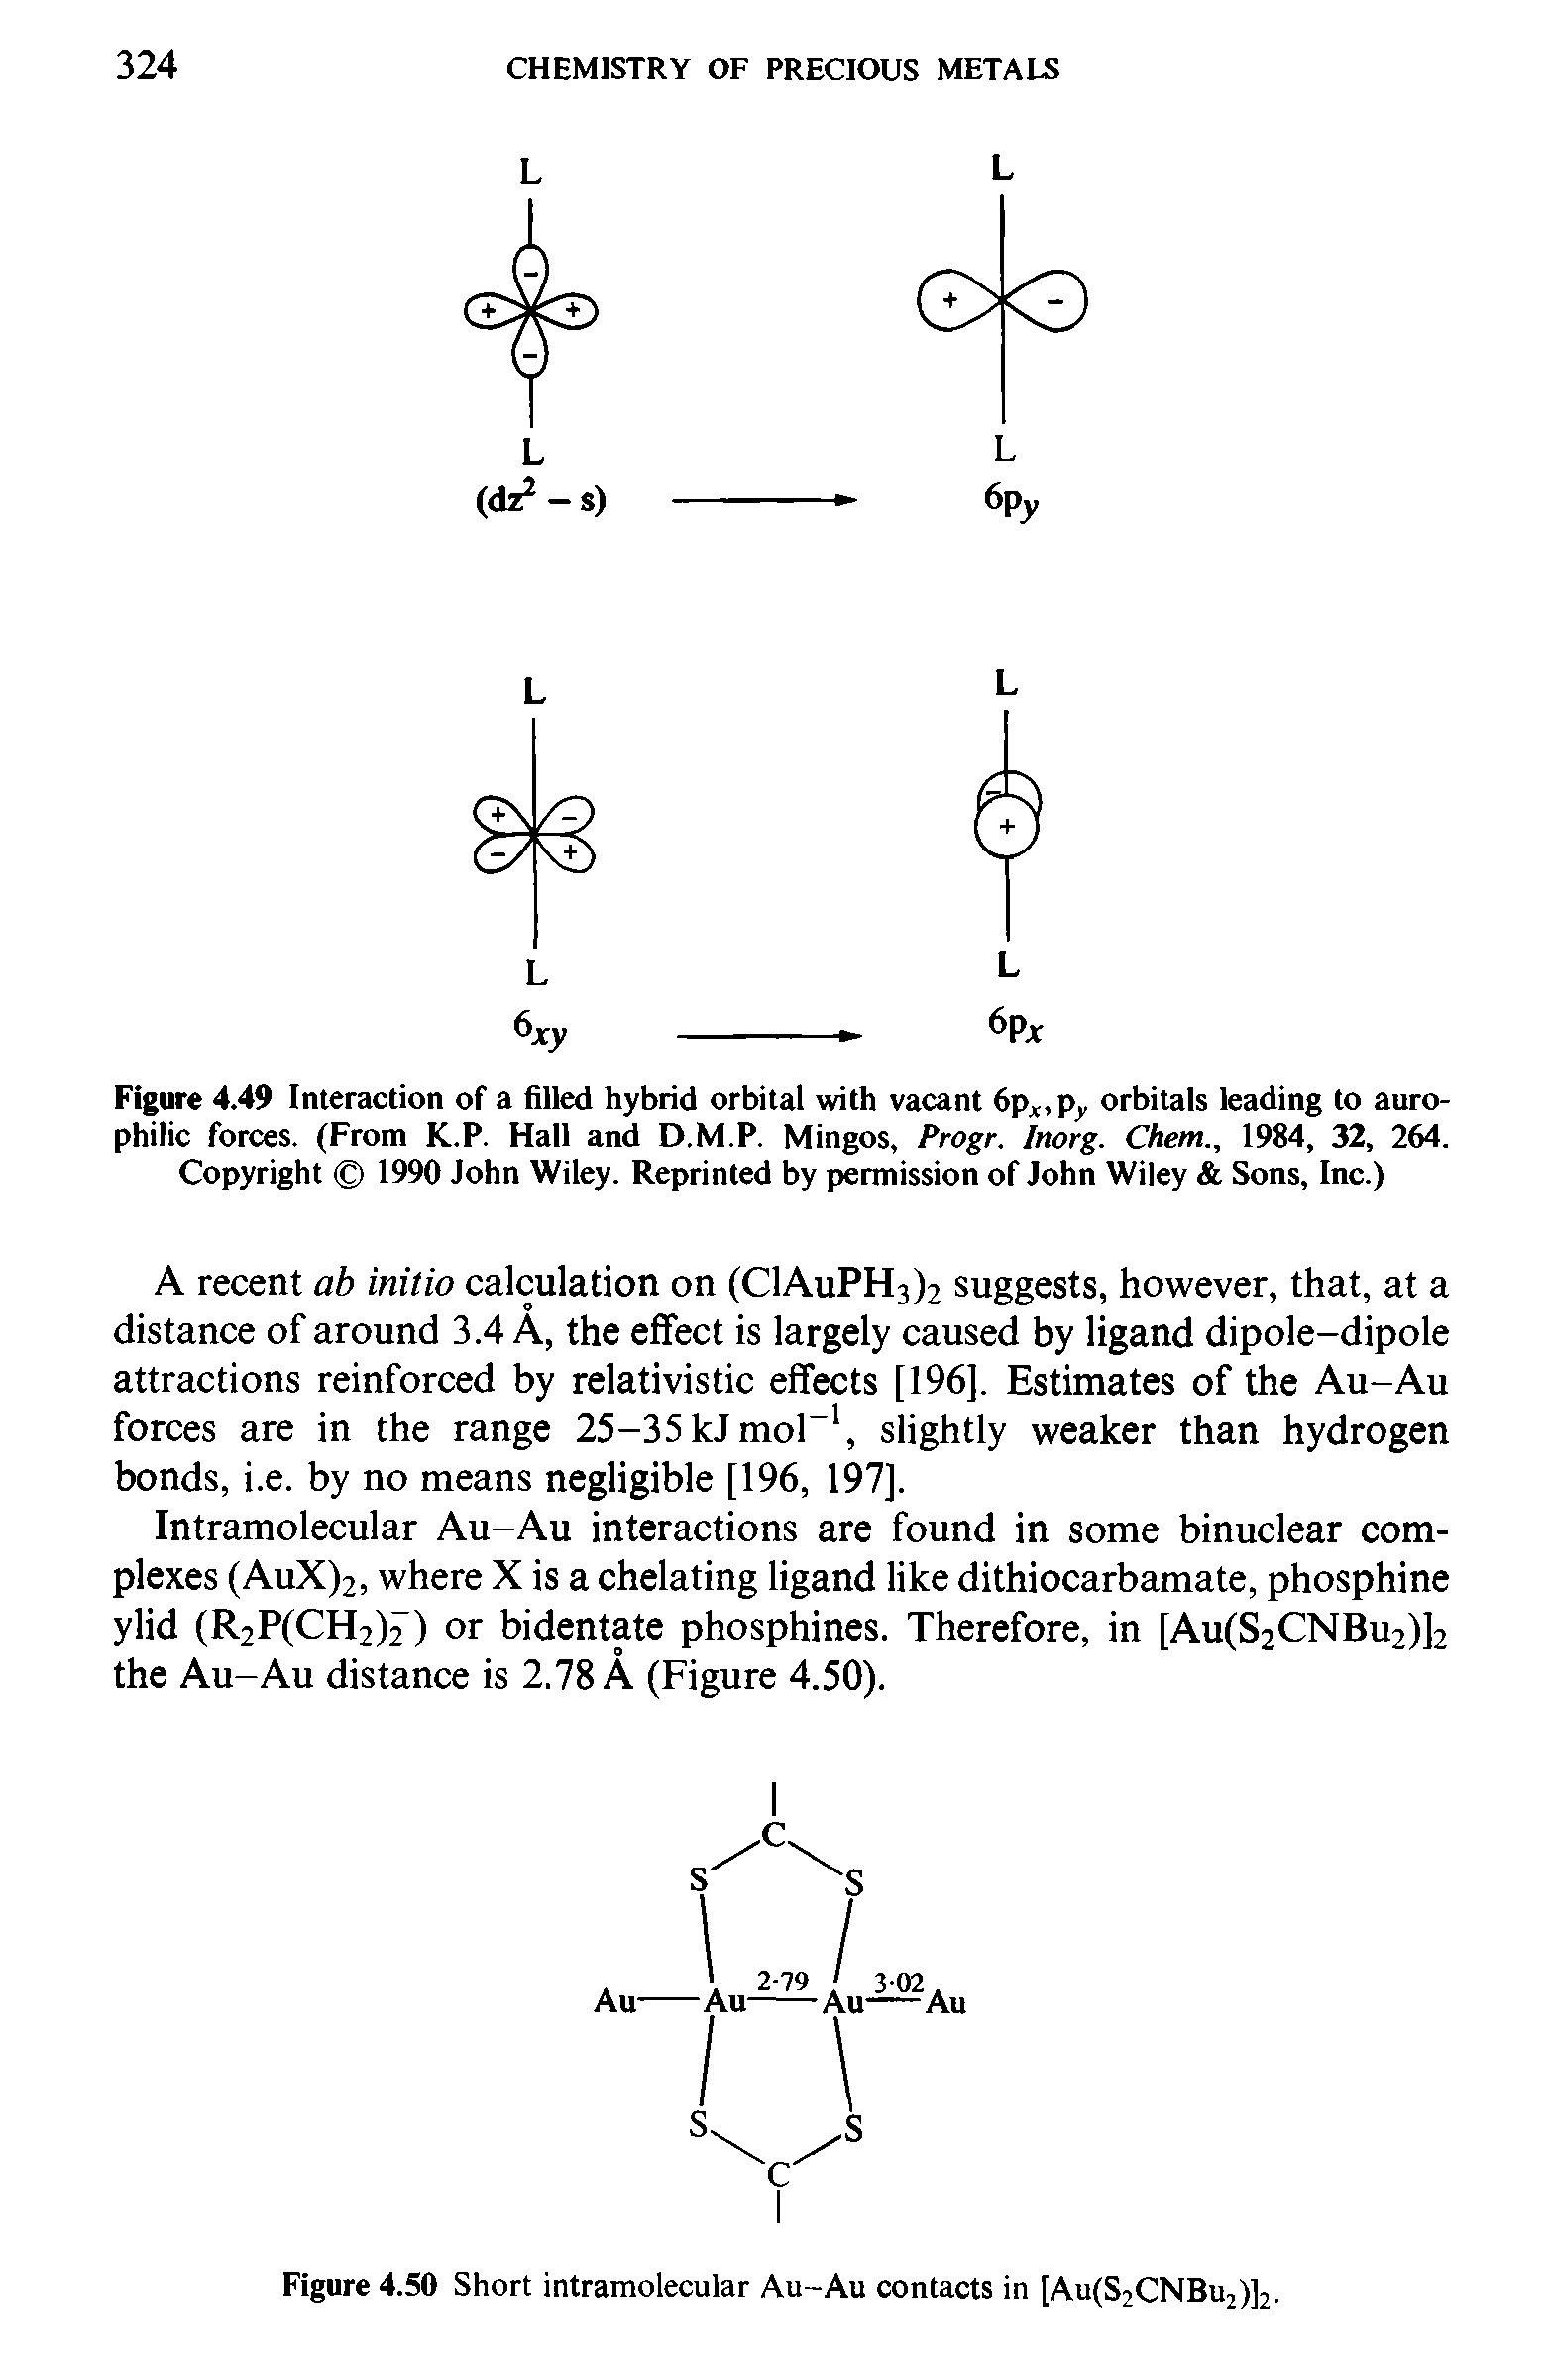 Figure 4.49 Interaction of a filled hybrid orbital with vacant 6px,py orbitals leading to auro-philic forces. (From K.P. Hall and D.M.P. Mingos, Progr. lnorg. Chem., 1984, 32, 264.